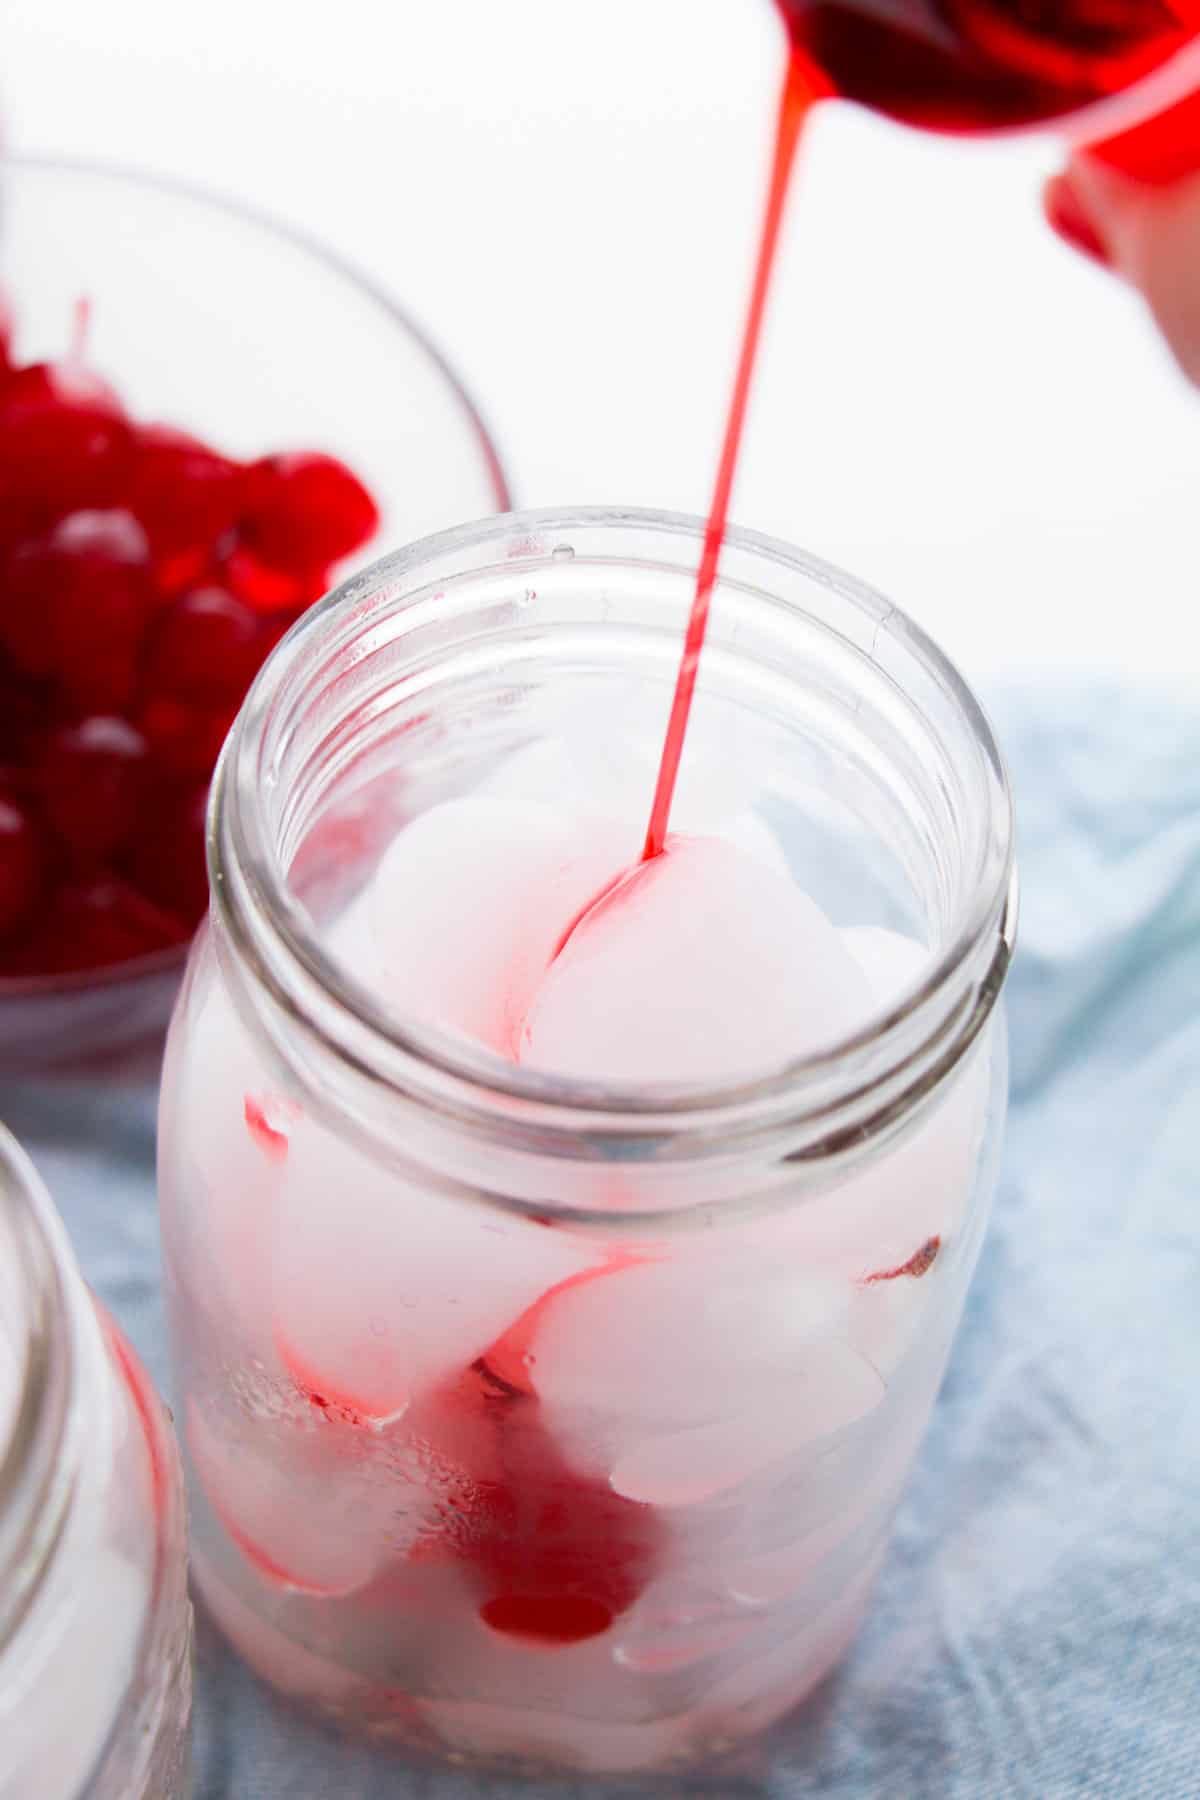 Grenadine being poured into ice-filled mason jar.